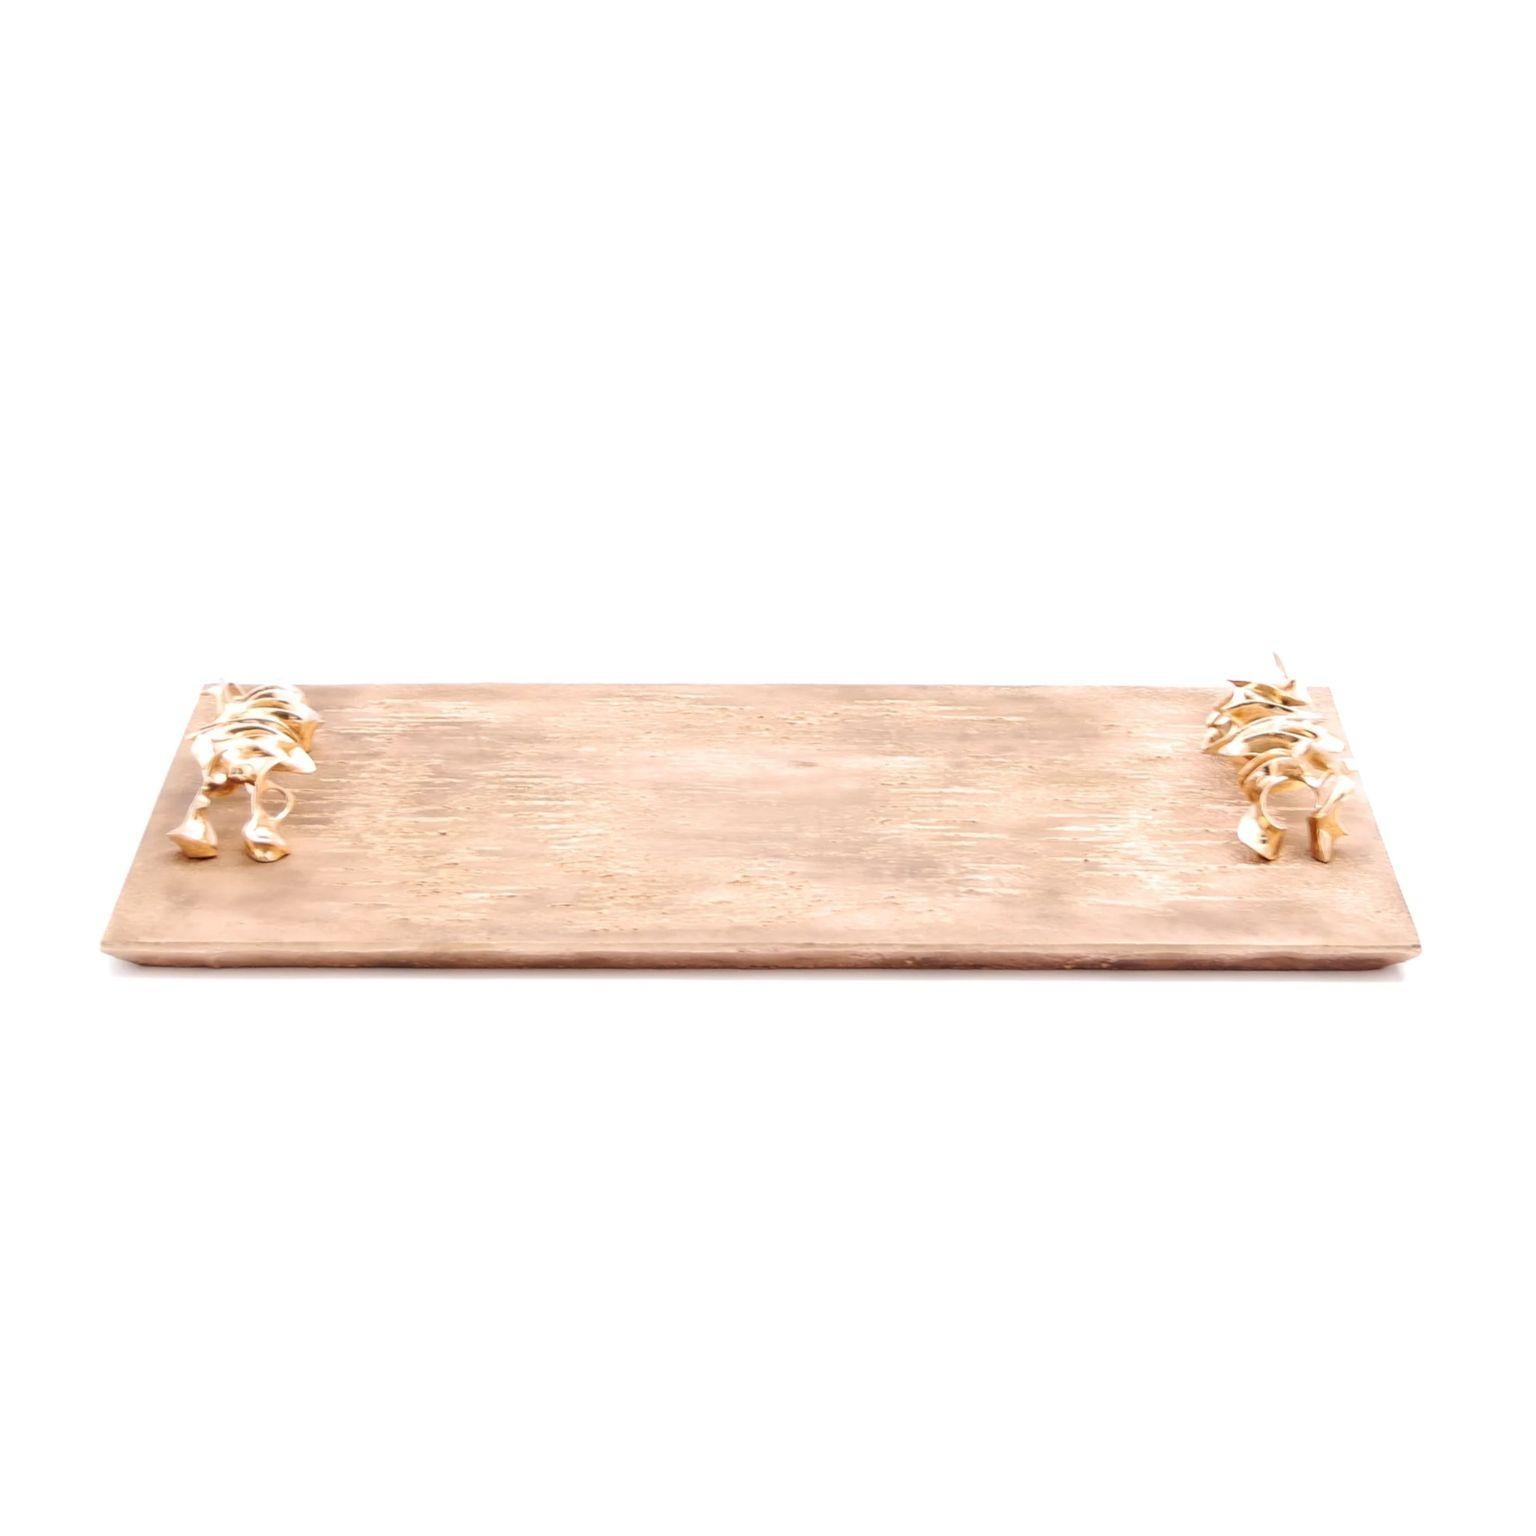 Mariae bar tray by Fakasaka Design
Dimensions: W 63 cm D 37 cm H 7 cm.
Materials: polished bronze.

 FAKASAKA is a design company focused on production of high-end furniture, lighting, decorative objects, jewels, and accessories.

Established